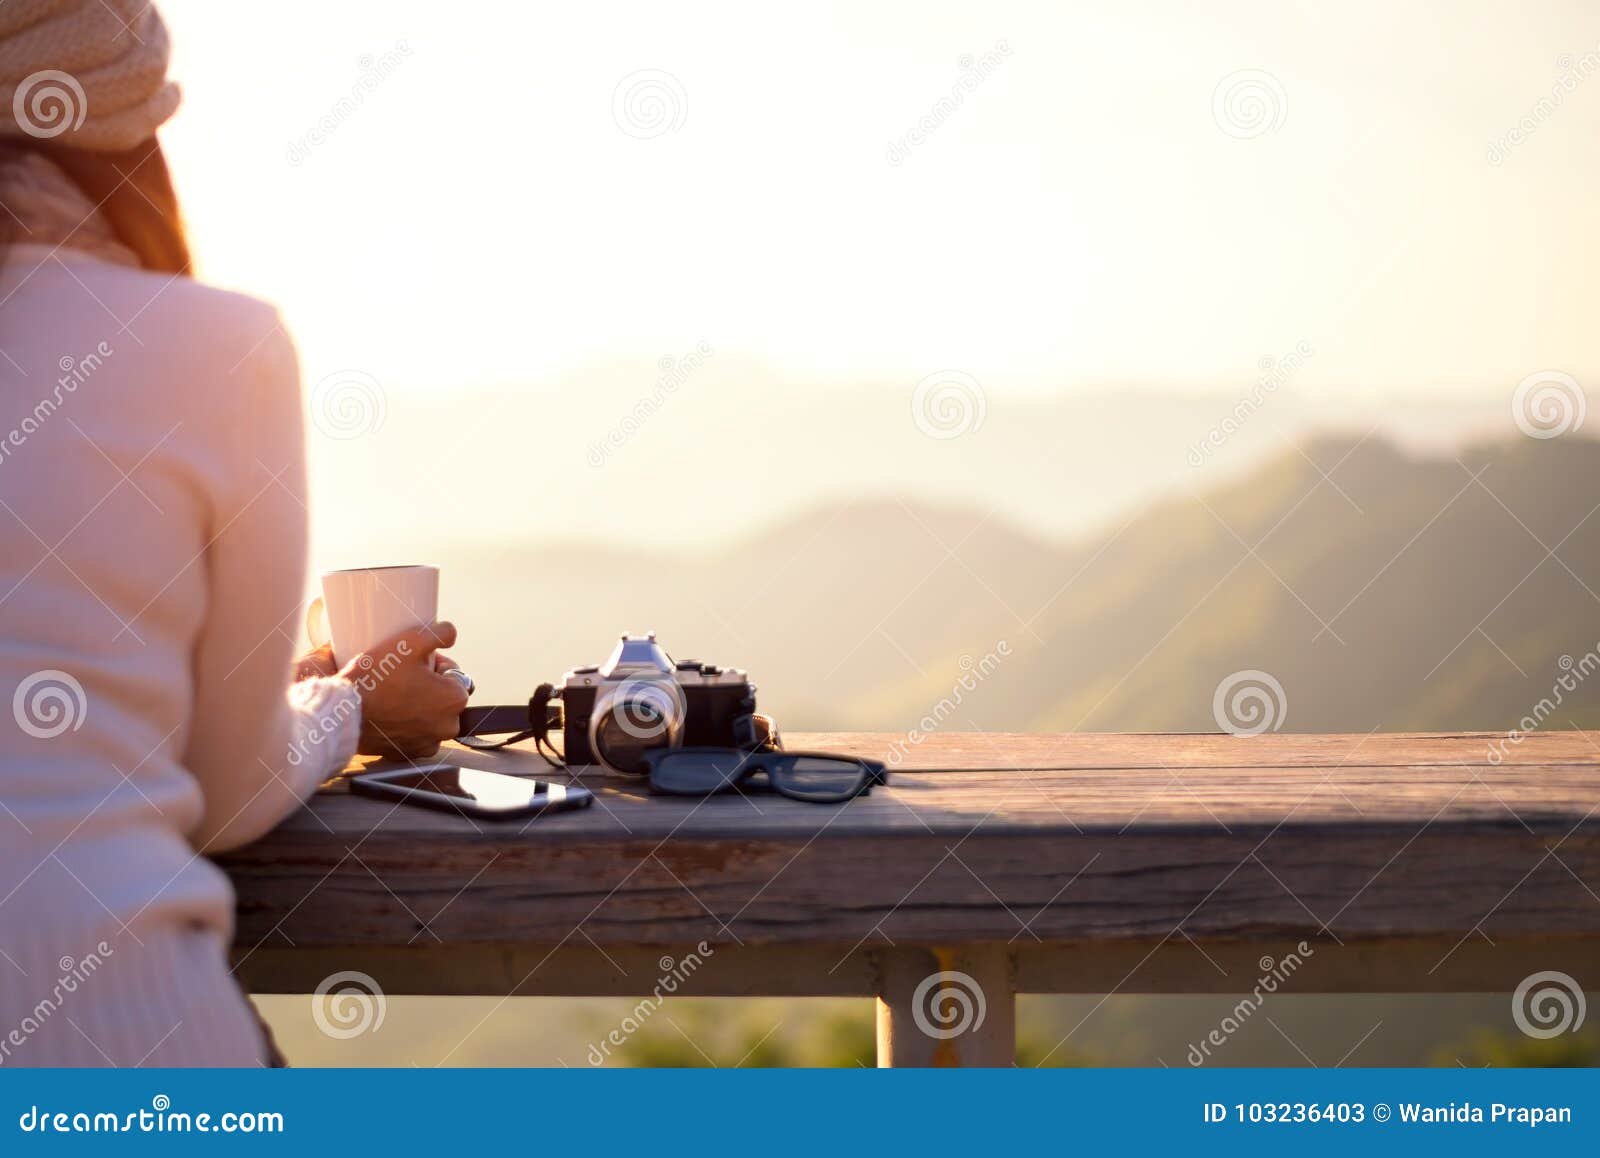 smiling asian woman drinking coffee and tea and take a photo and relax in sun sitting outdoor in sunshine light enjoying her warm